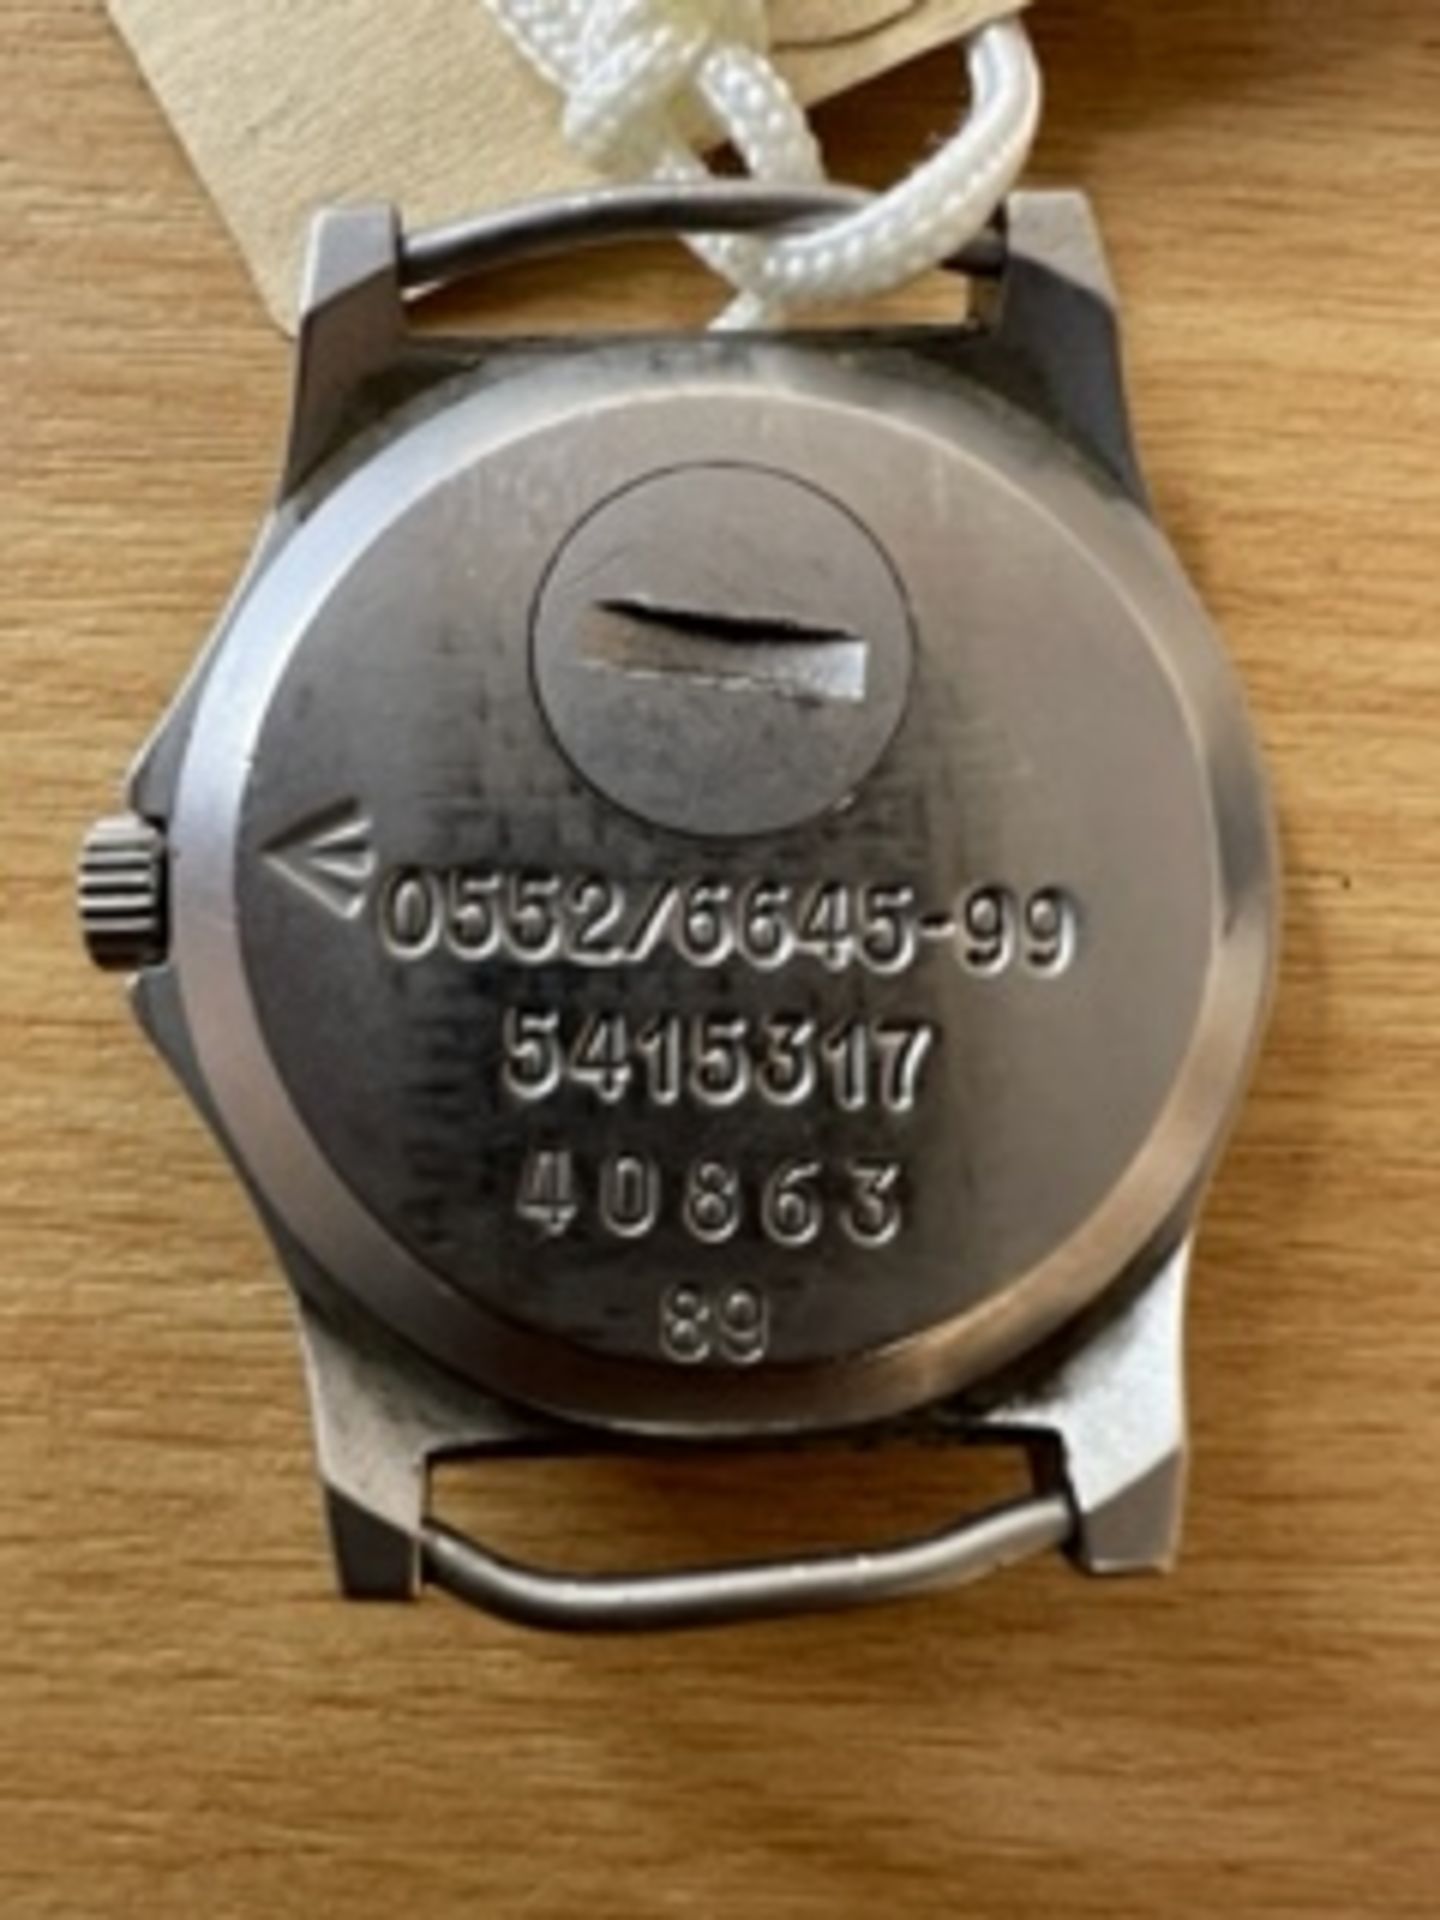 CWC 0552 R/ MARINES NAVY SERVICE WATCH NATO MARKS DATE 1989 - Image 4 of 5